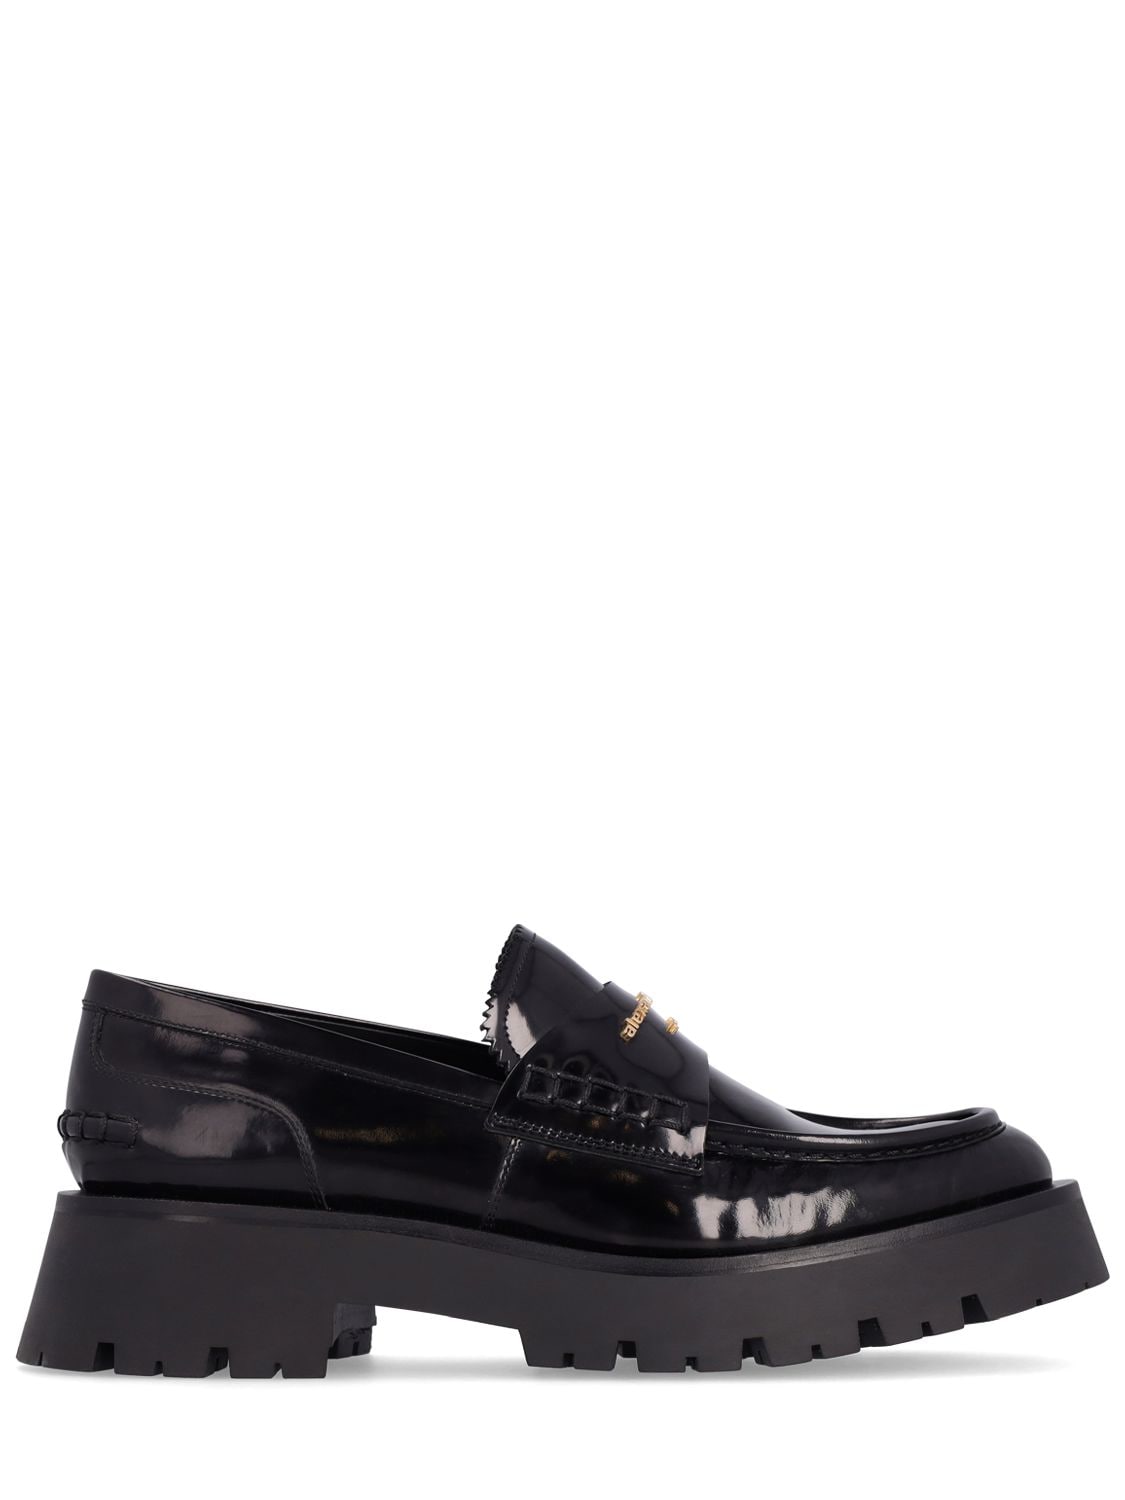 Alexander Wang 45mm Carter Lug Patent Leather Loafers In Schwarz